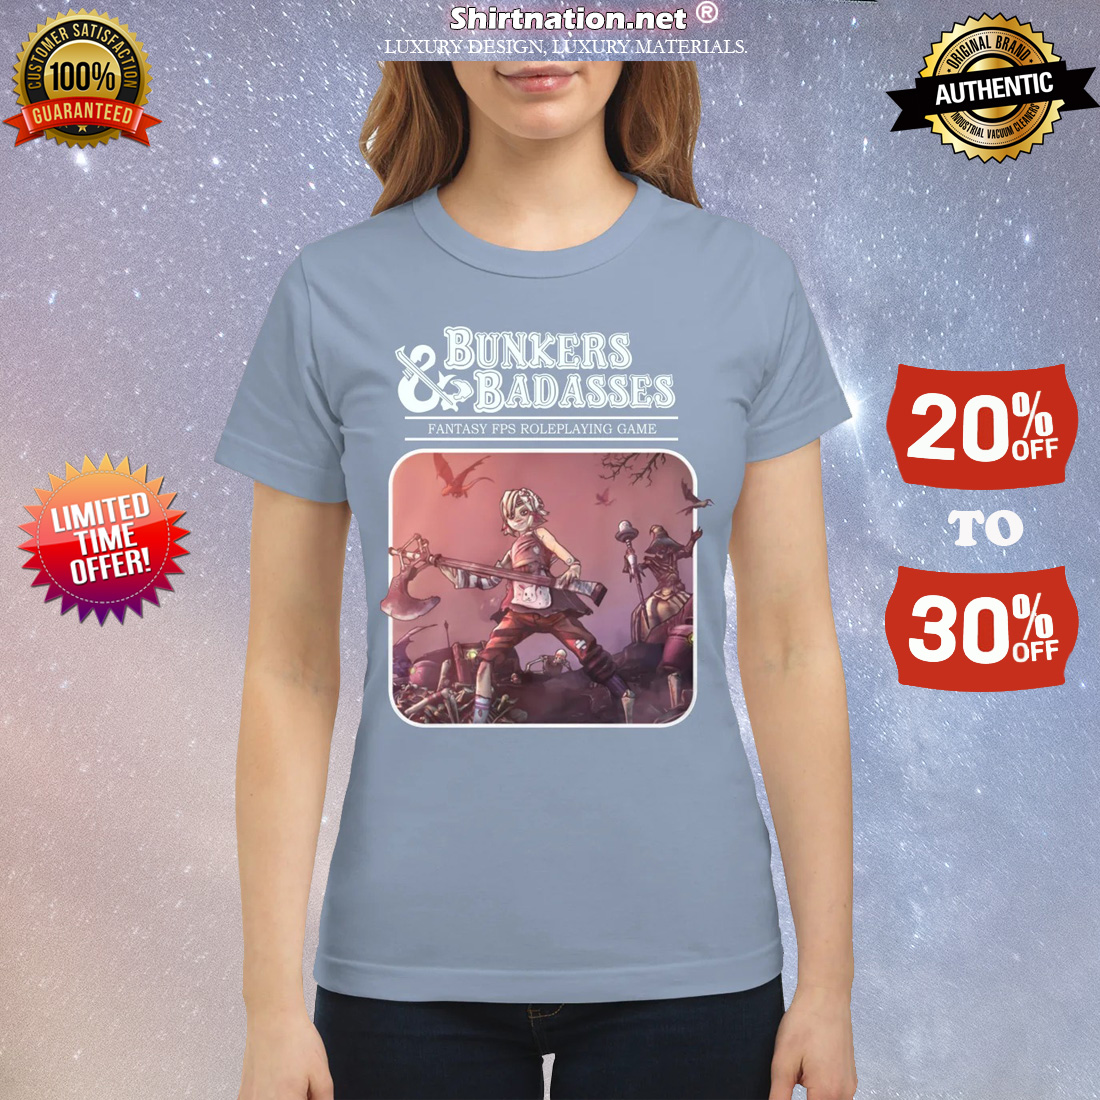 Bunkers and badasses fantasy fps game classic shirt